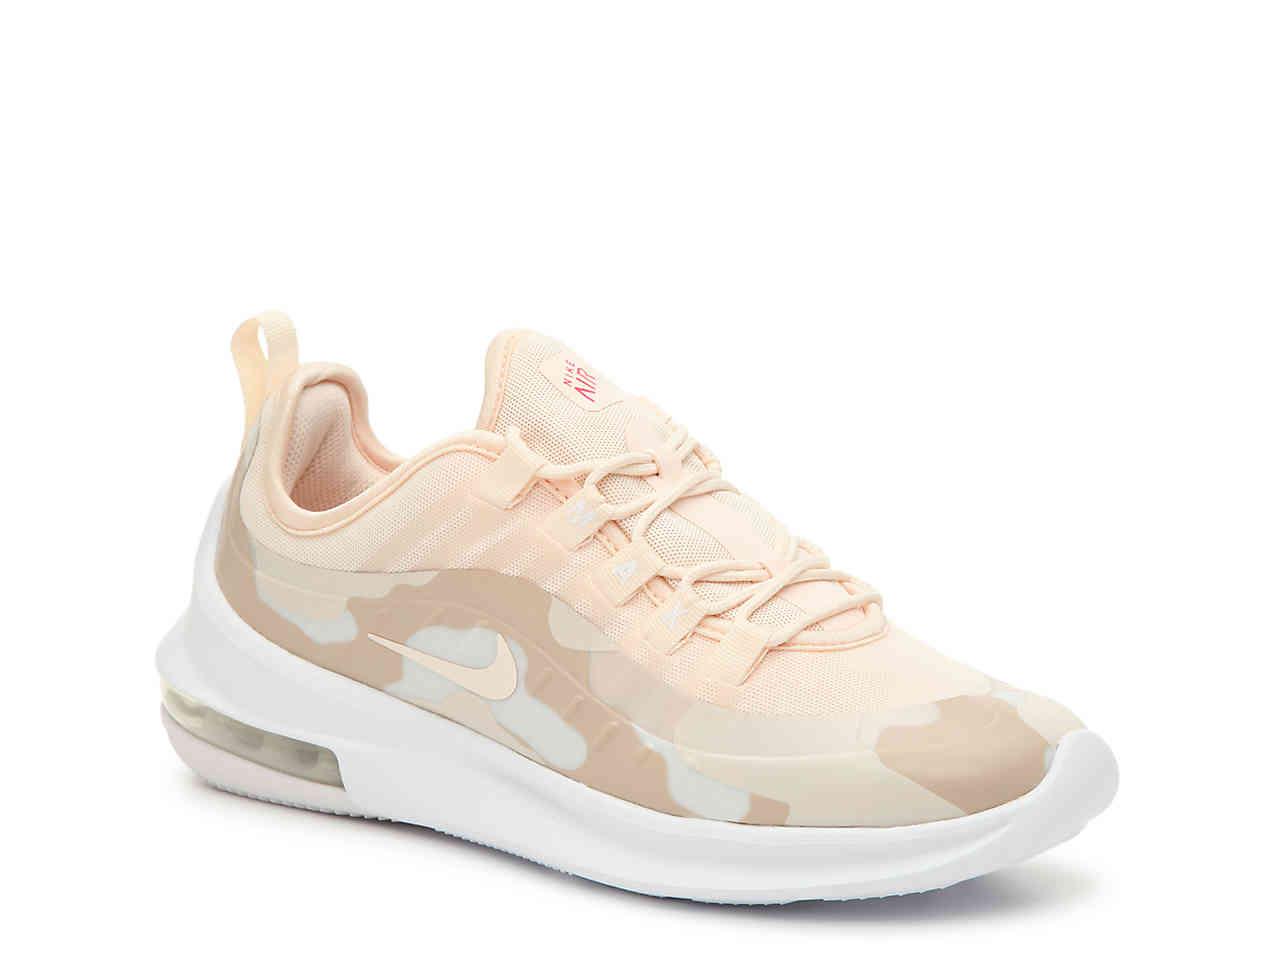 Nike Synthetic Air Max Axis Premium Sneaker in Light Peach/Beige Camouflage  (Natural) - Lyst